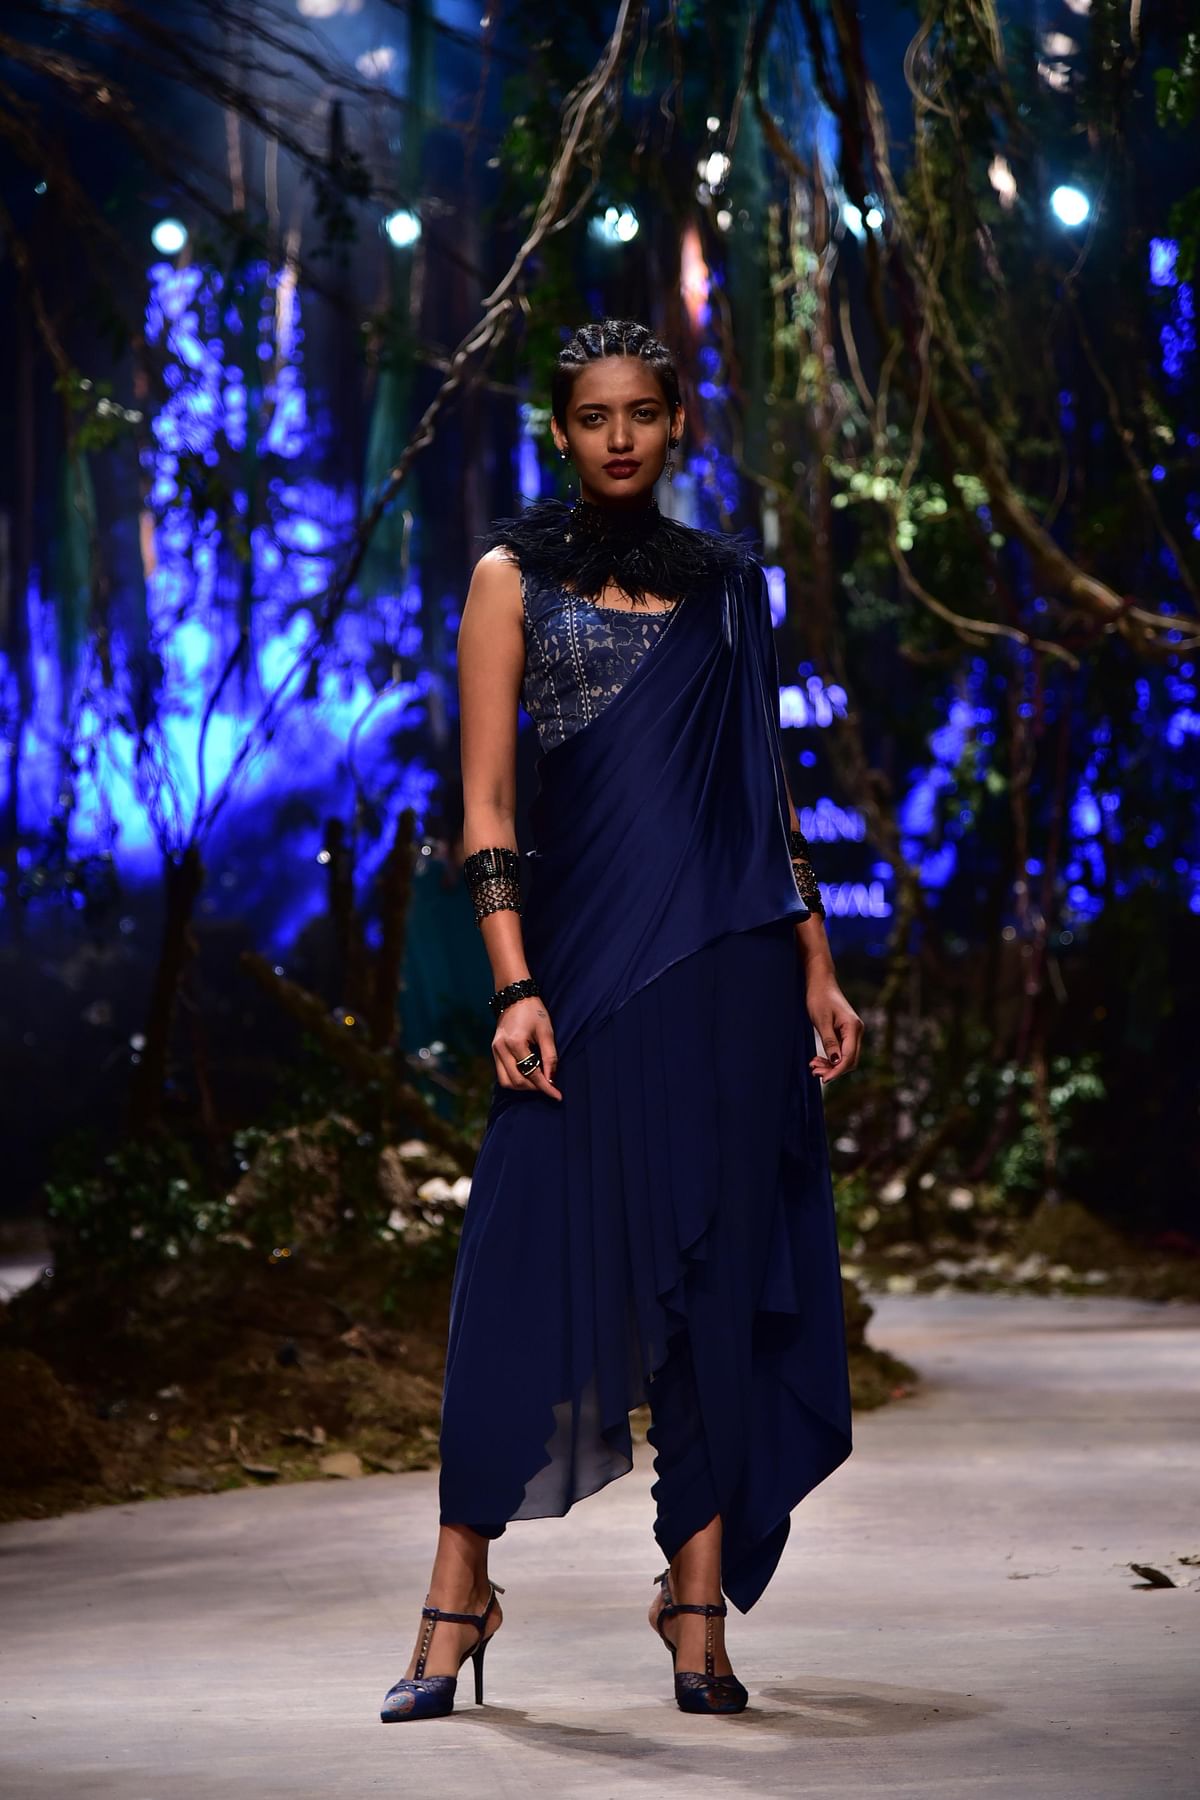 Tarun Tahiliani’s drapes, and Amit Aggarwal’s sustainable couture ruled the grand finale of AIFW AW 2017.